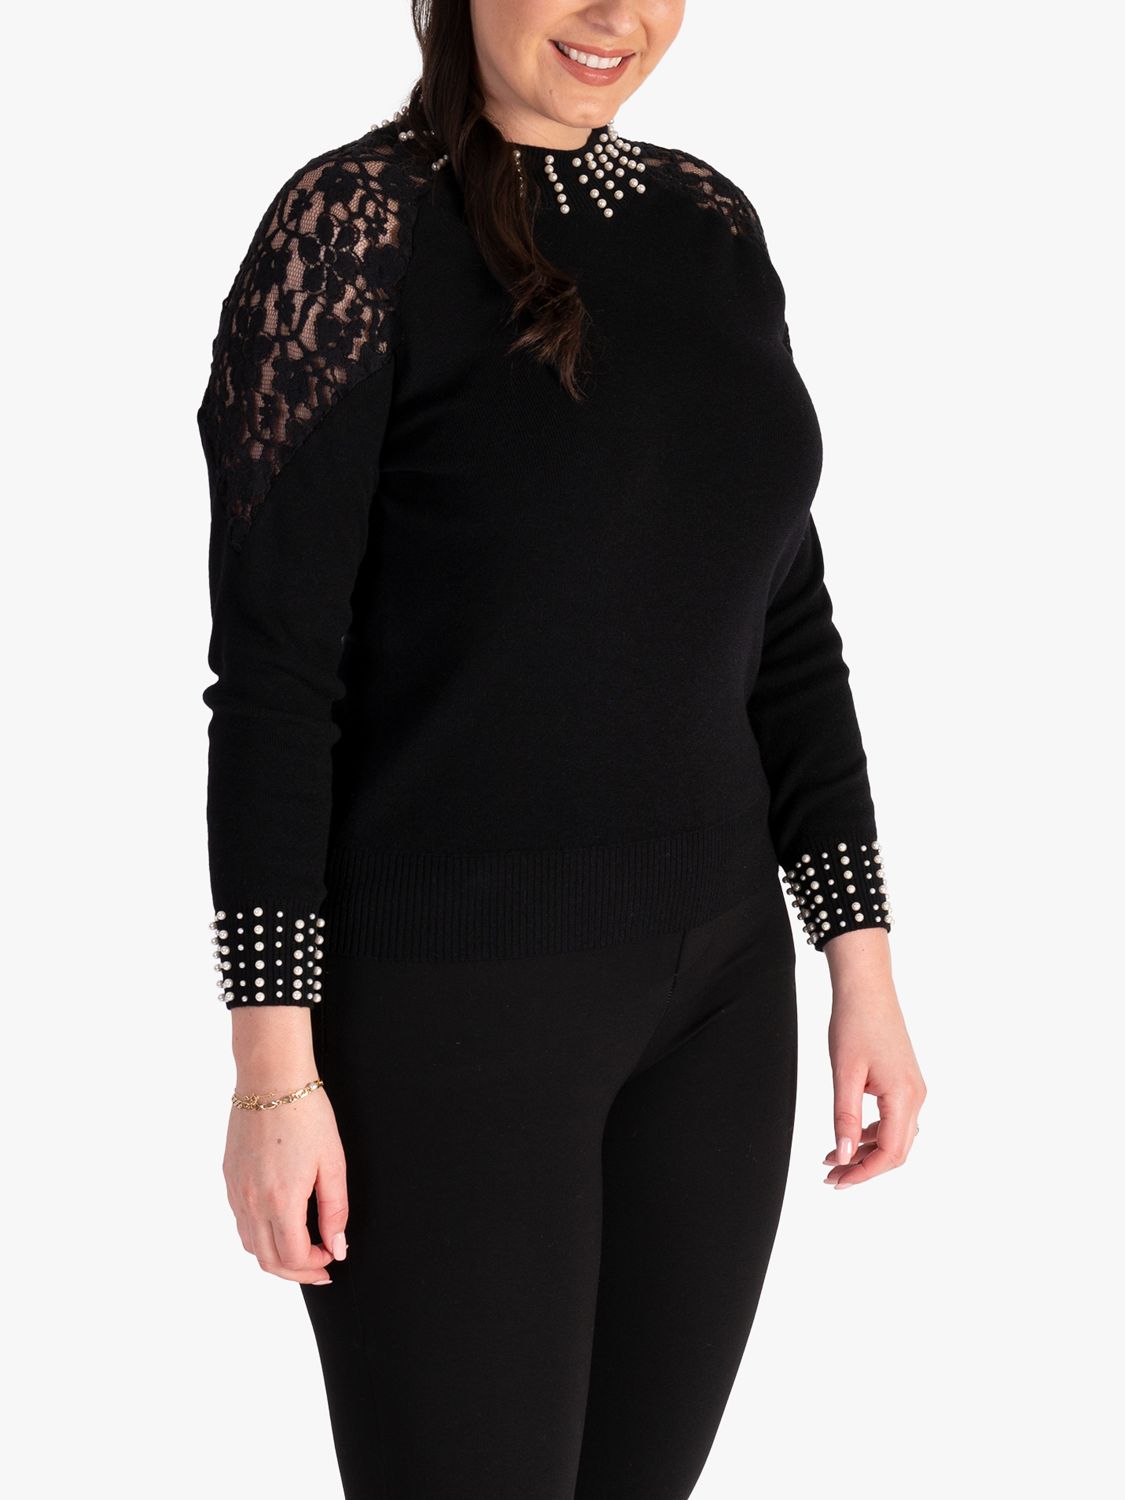 chesca Lace Detail and Pearl Trim Jumper, Black, 12-14